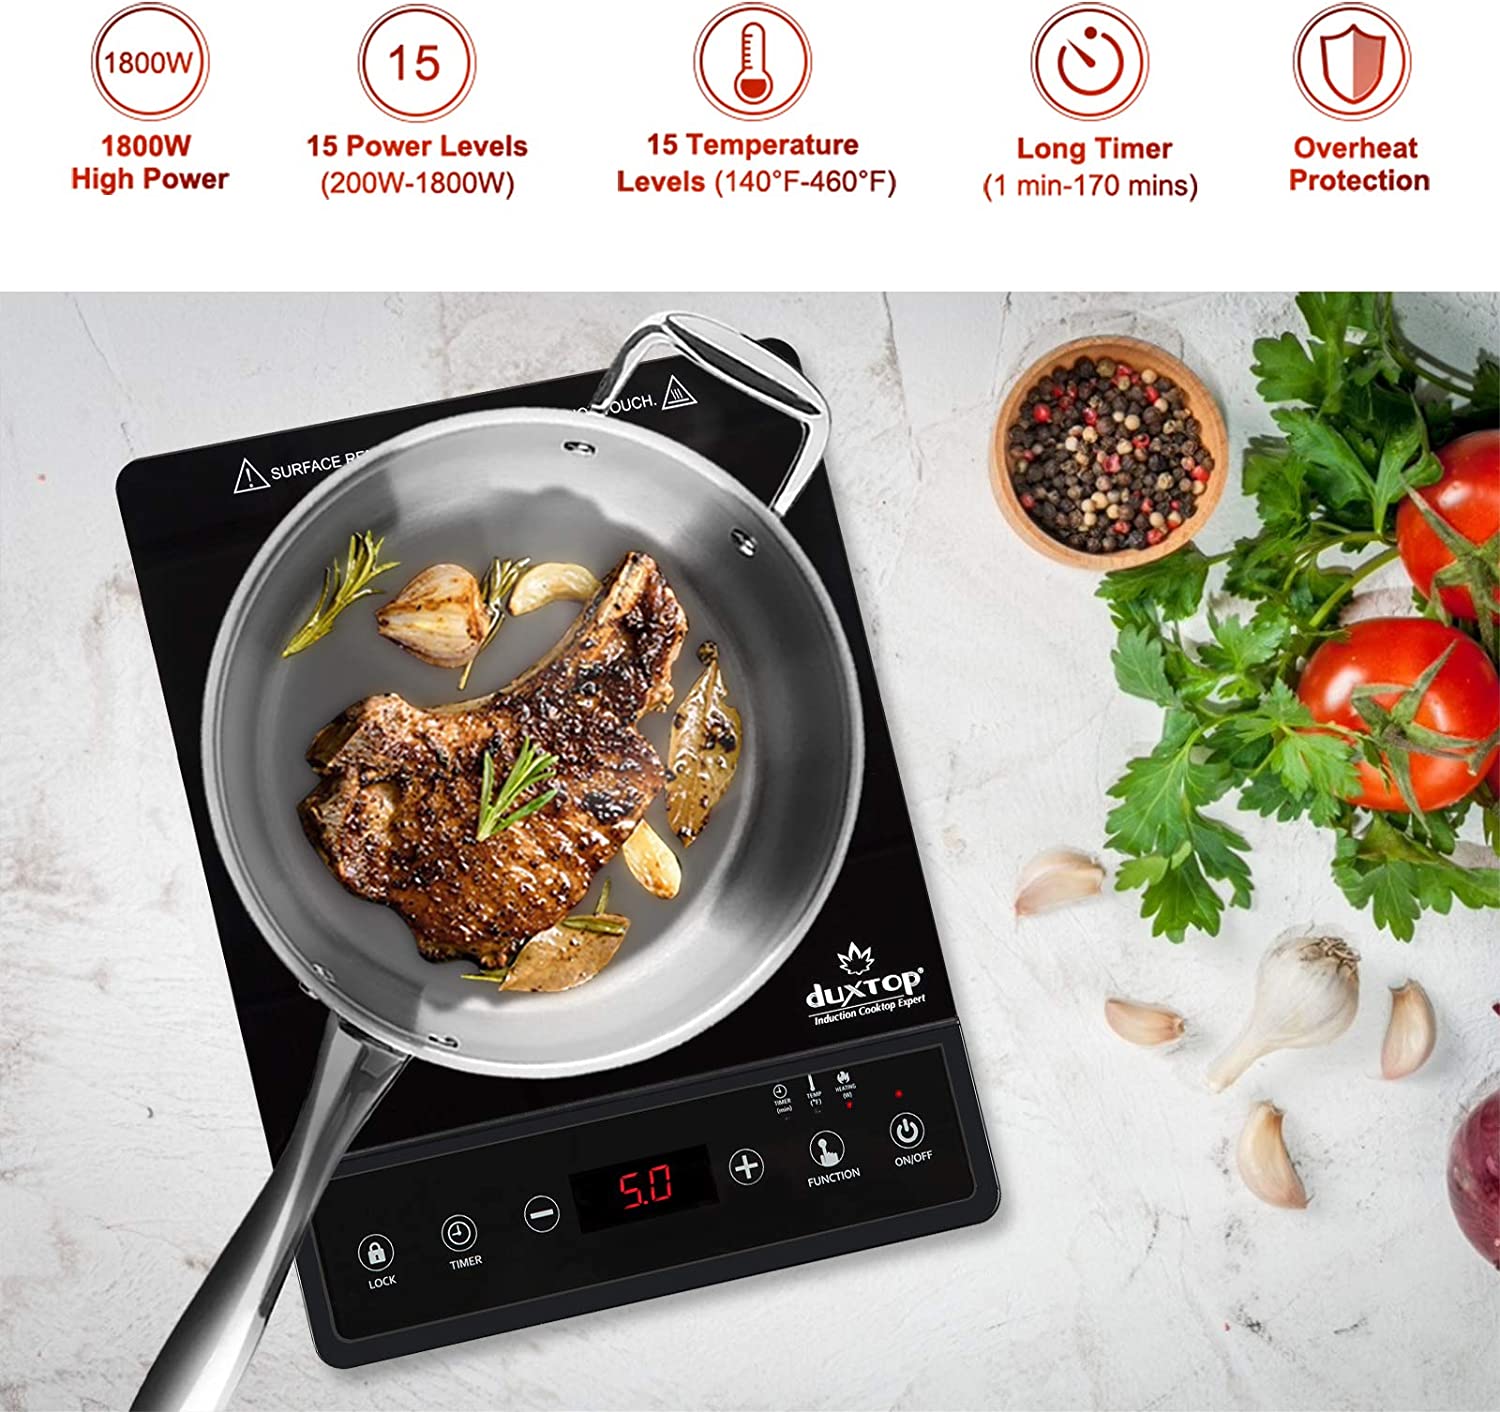 Duxtop 1800W Portable Induction Cooktop Countertop Burner, Black BT-180G3  Tested